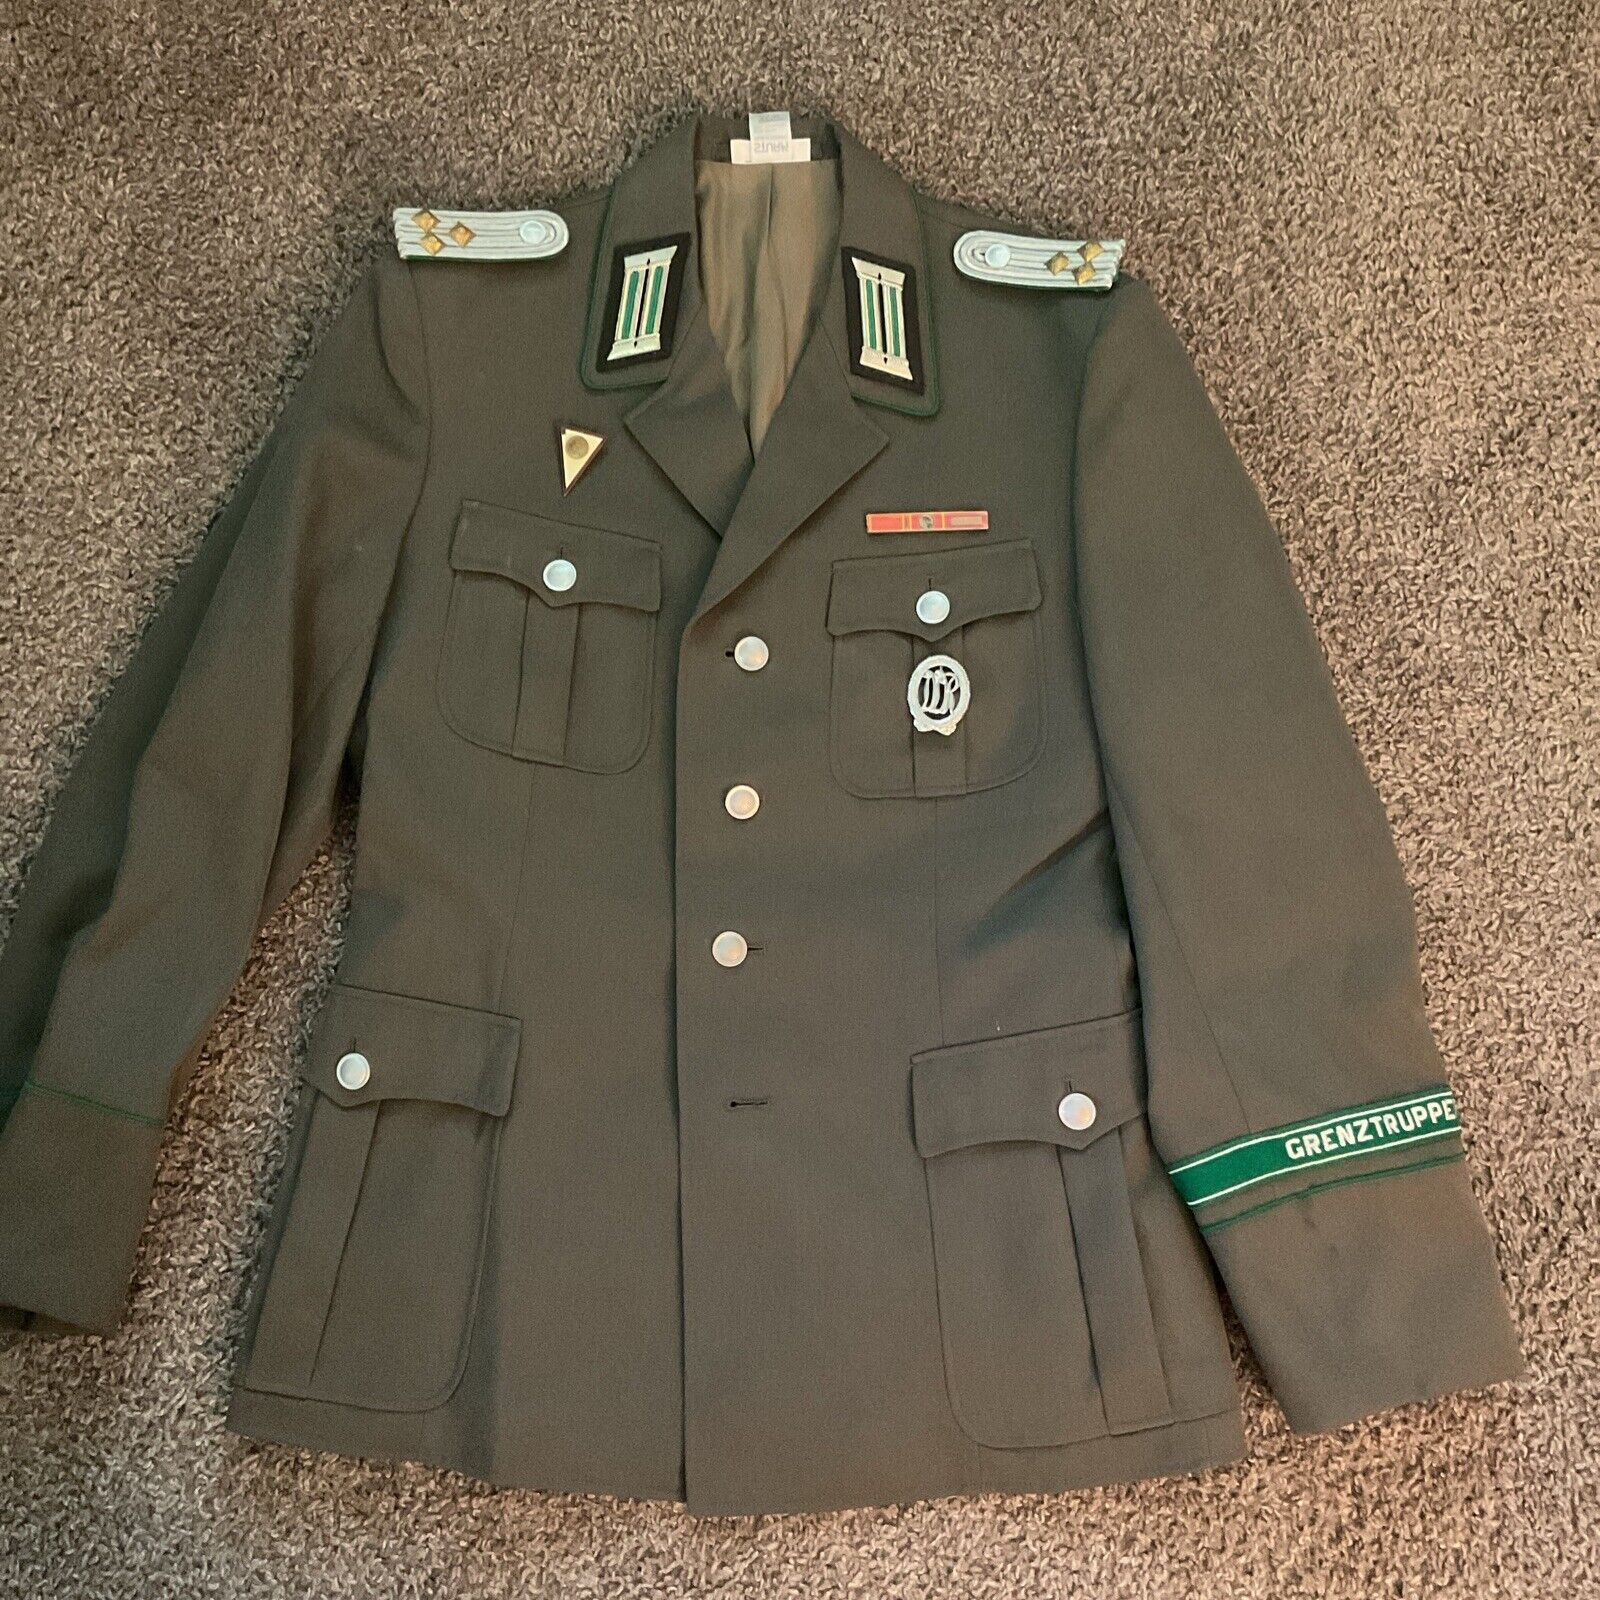 East German Grenztruppen Jacket with Medals Size SG 48